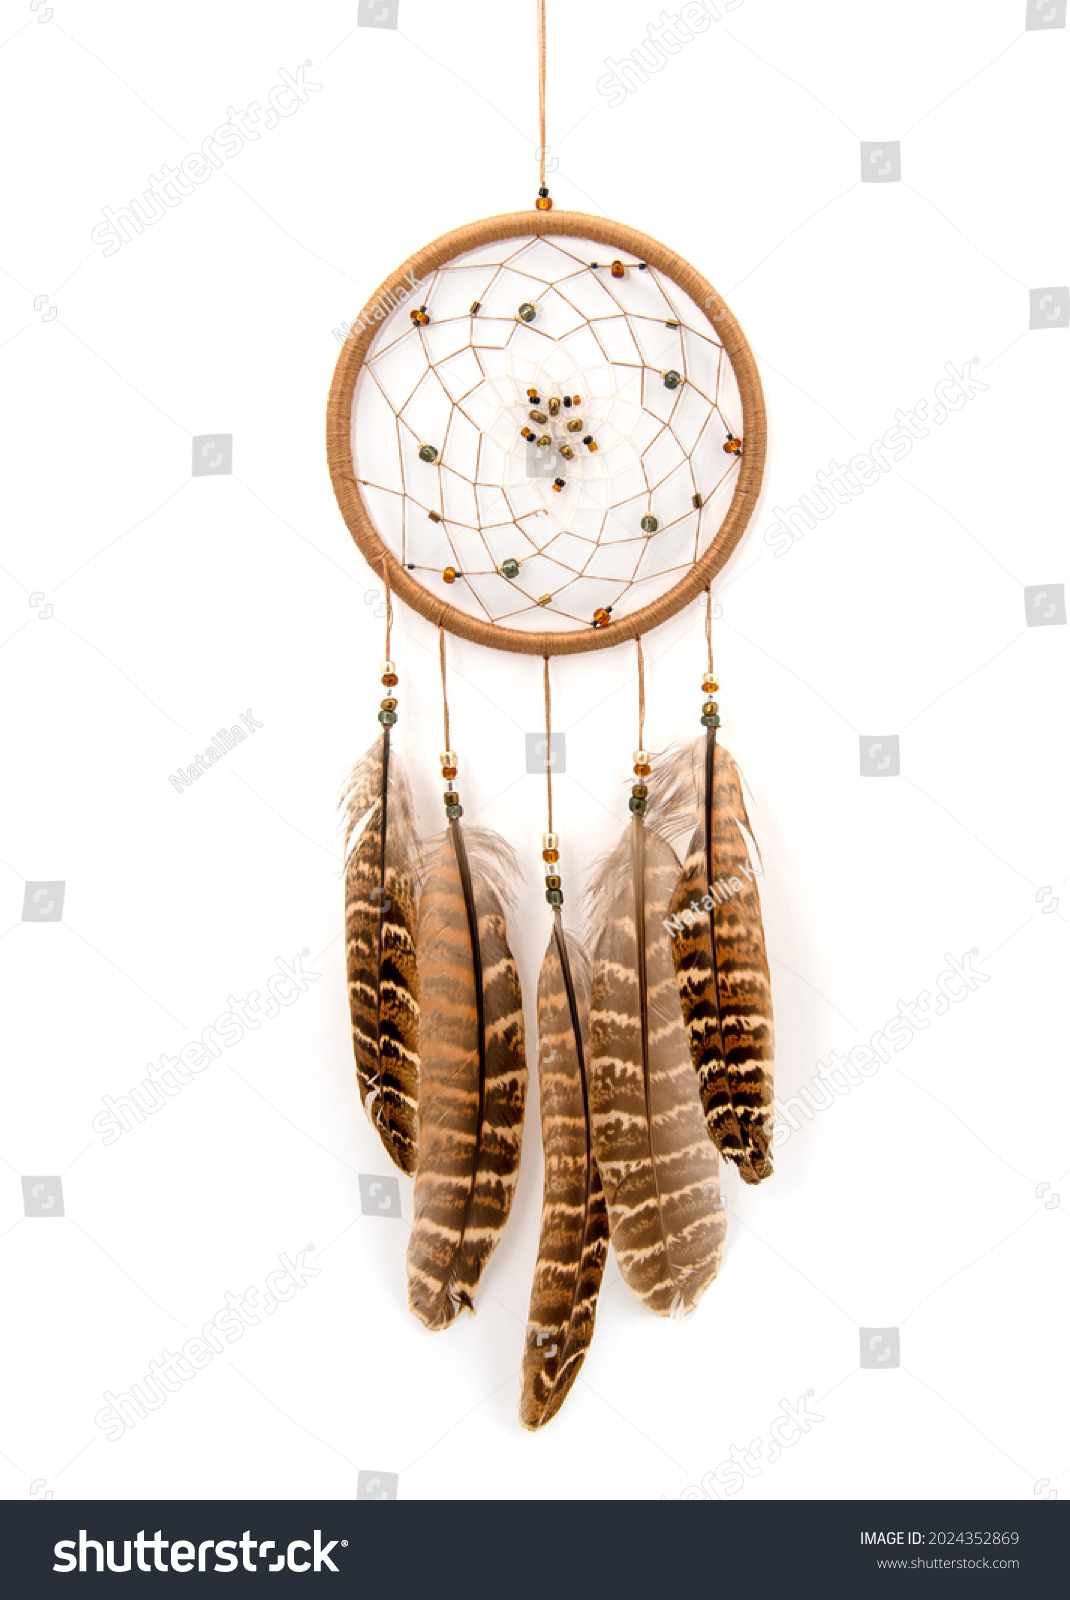 Native American Dreamcatcher Photo isolated on white #2024352869